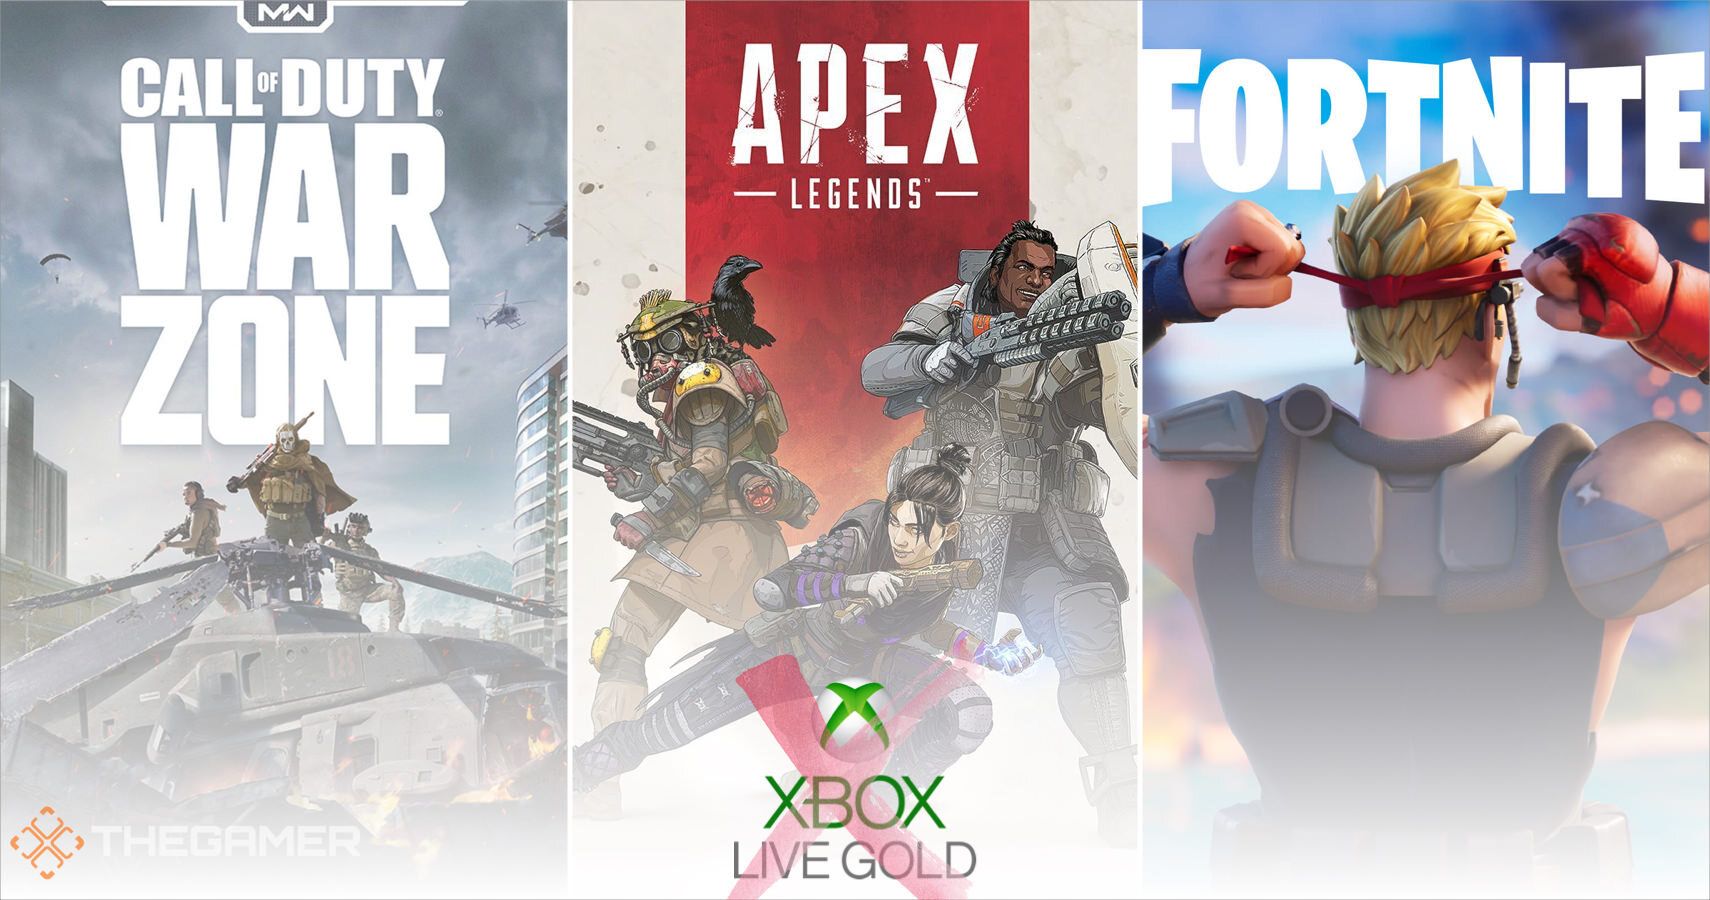 Xbox - Free-to-play now means free-to-play. Starting now